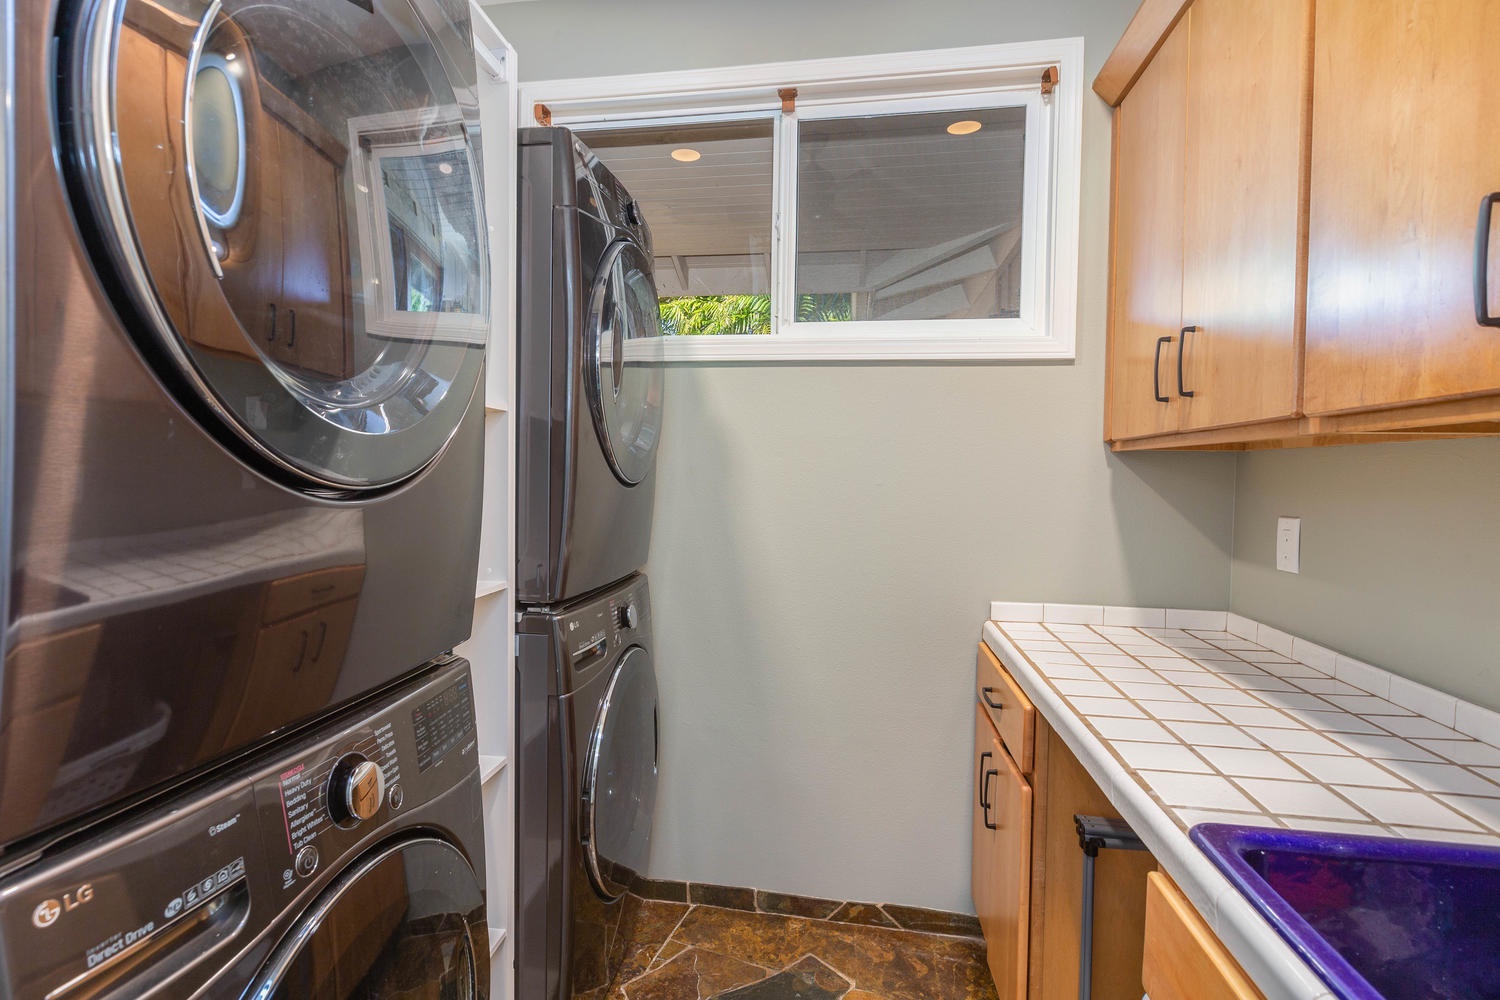 Princeville Vacation Rentals, Pohaku Villa - Laundry room with two washers and dryers